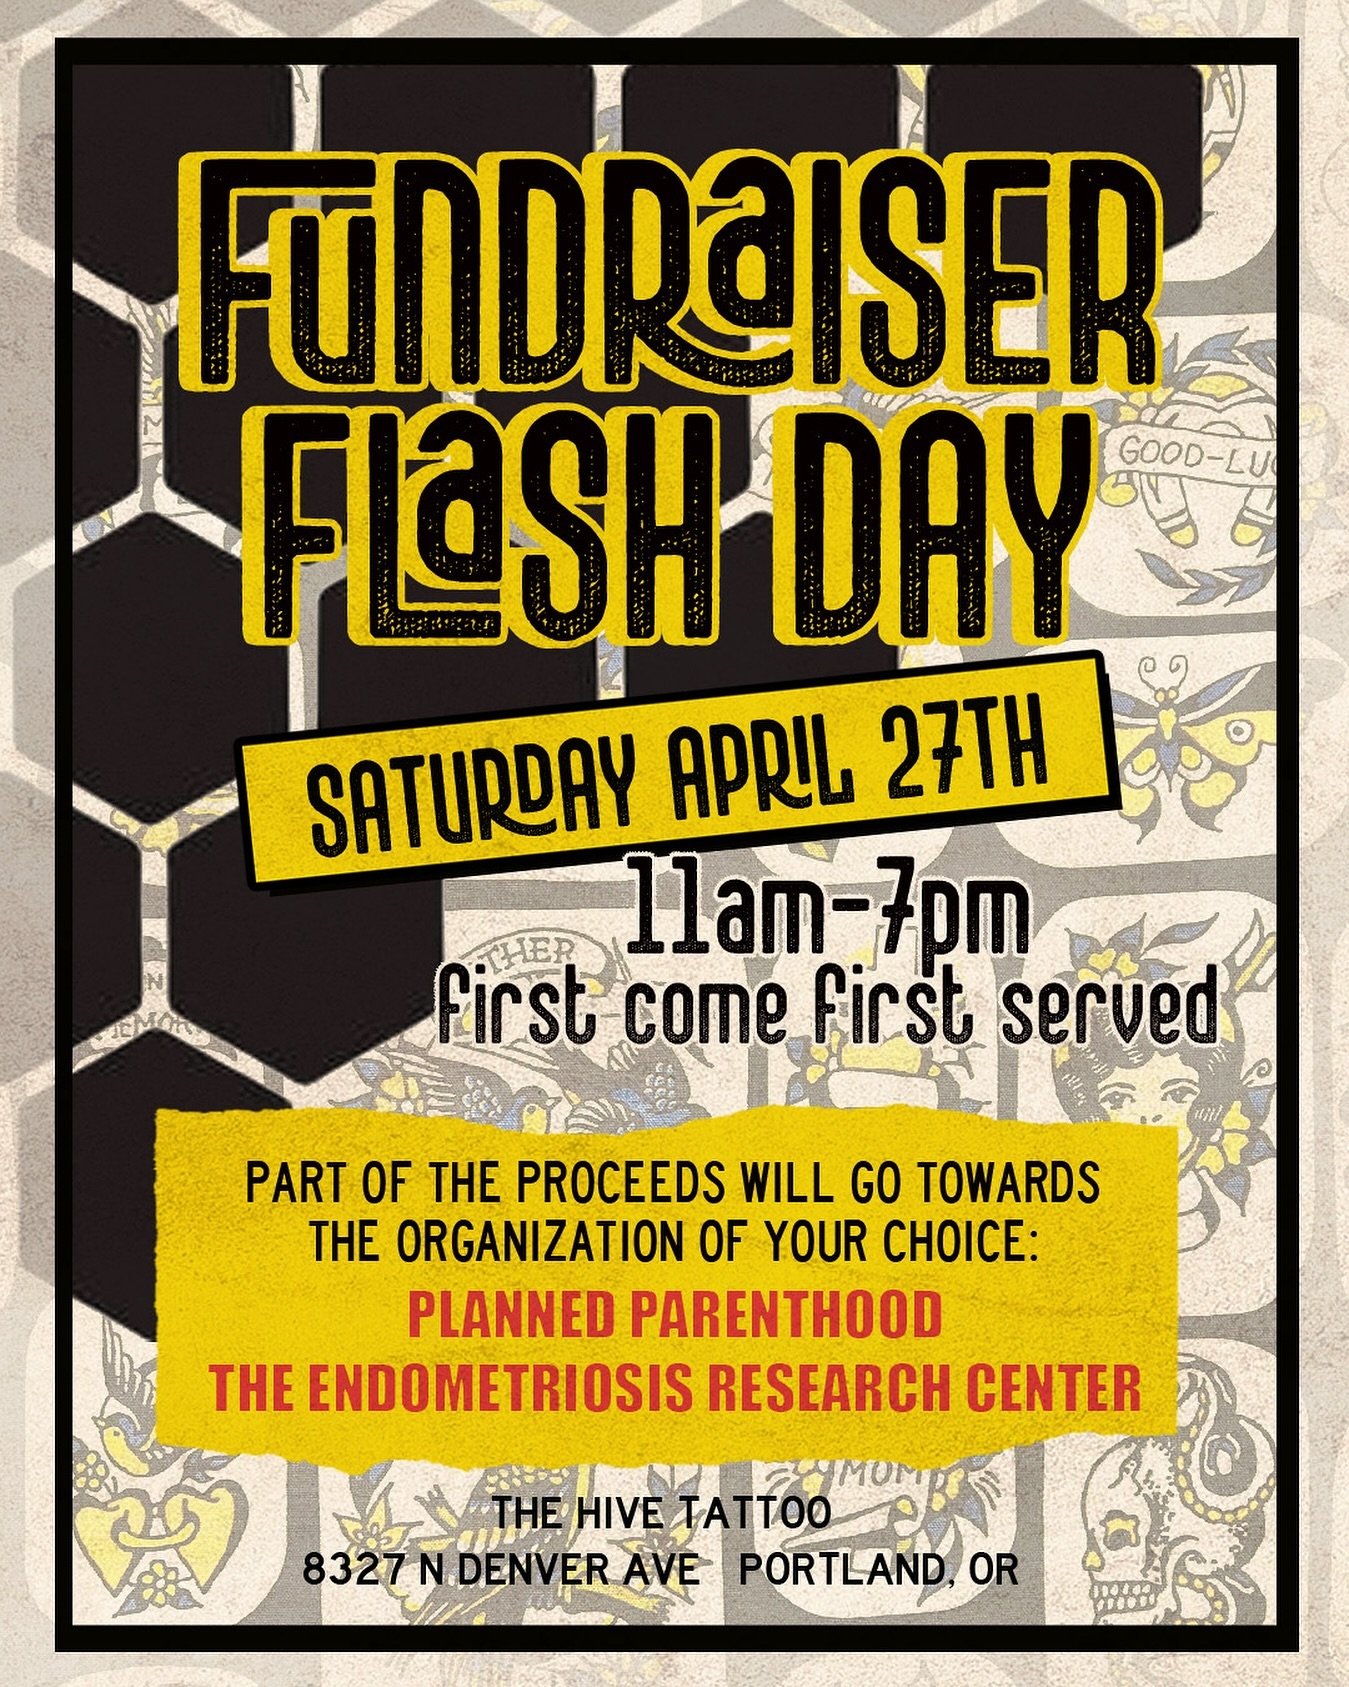 We&rsquo;re hosting a Flash Day fundraiser for Planned Parenthood and The Endometriosis Research Center this Saturday April 27th! 50% of the proceeds will be donated to the organization of your choice. We&rsquo;re making event specific flash and offe